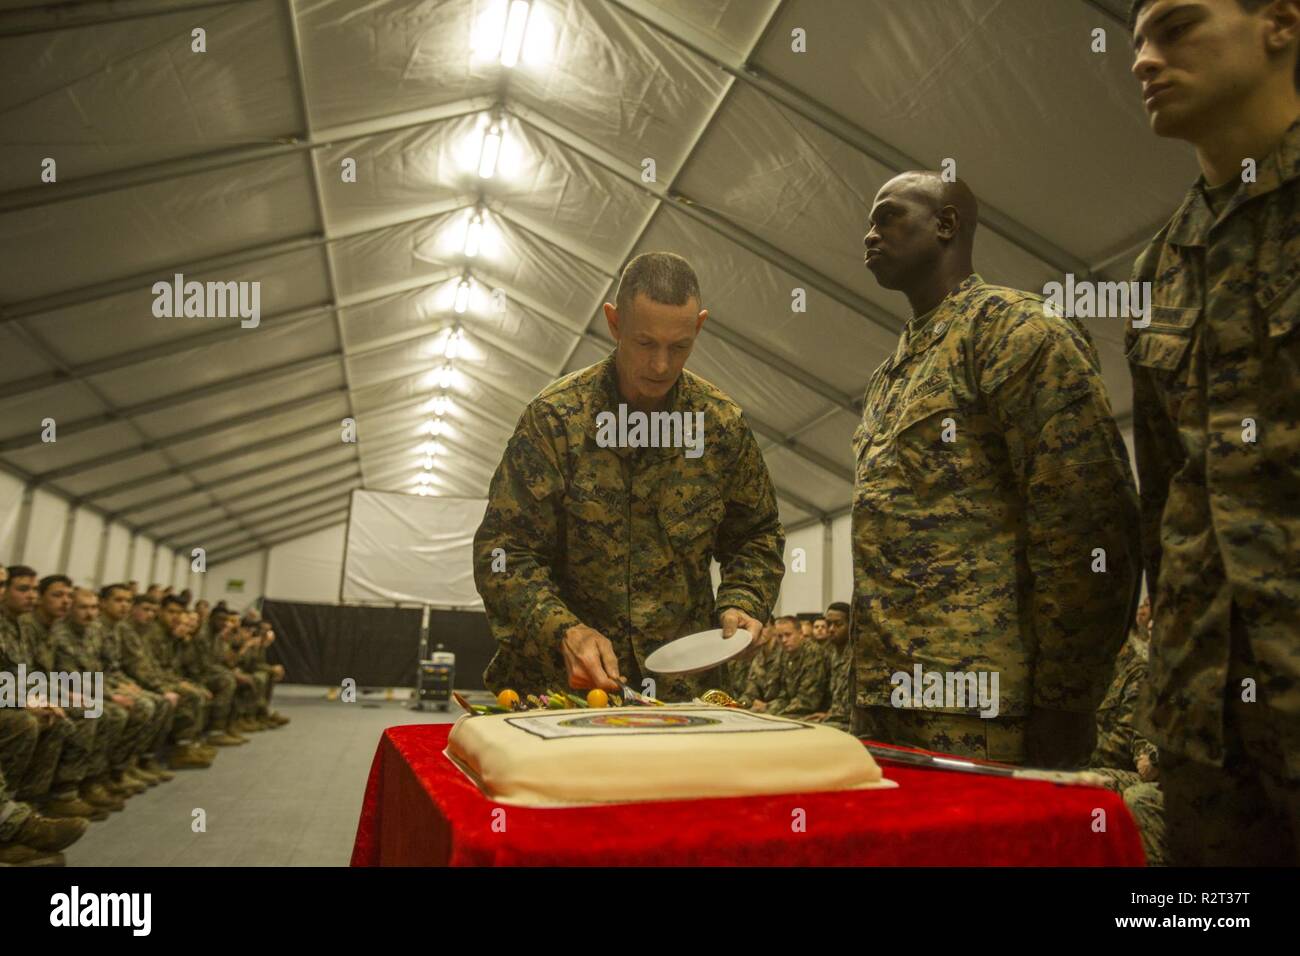 U.S. Marine Corps Brig. Gen. Stephen M. Neary, the deputy commanding general of II Marine Expeditionary Force, cuts a piece of ceremonial cake to give to the oldest and youngest Marines present during a ceremony celebrating the Marine Corps’ 243rd birthday on Vaernes Air Station, Norway, Nov. 10, 2018. The ceremony is held at the conclusion of Exercise Trident Juncture 18, an exercise in place to enhance the U.S. and NATO Allies’ and partners’ abilities to work together collectively to conduct military operations under challenging conditions. Stock Photo